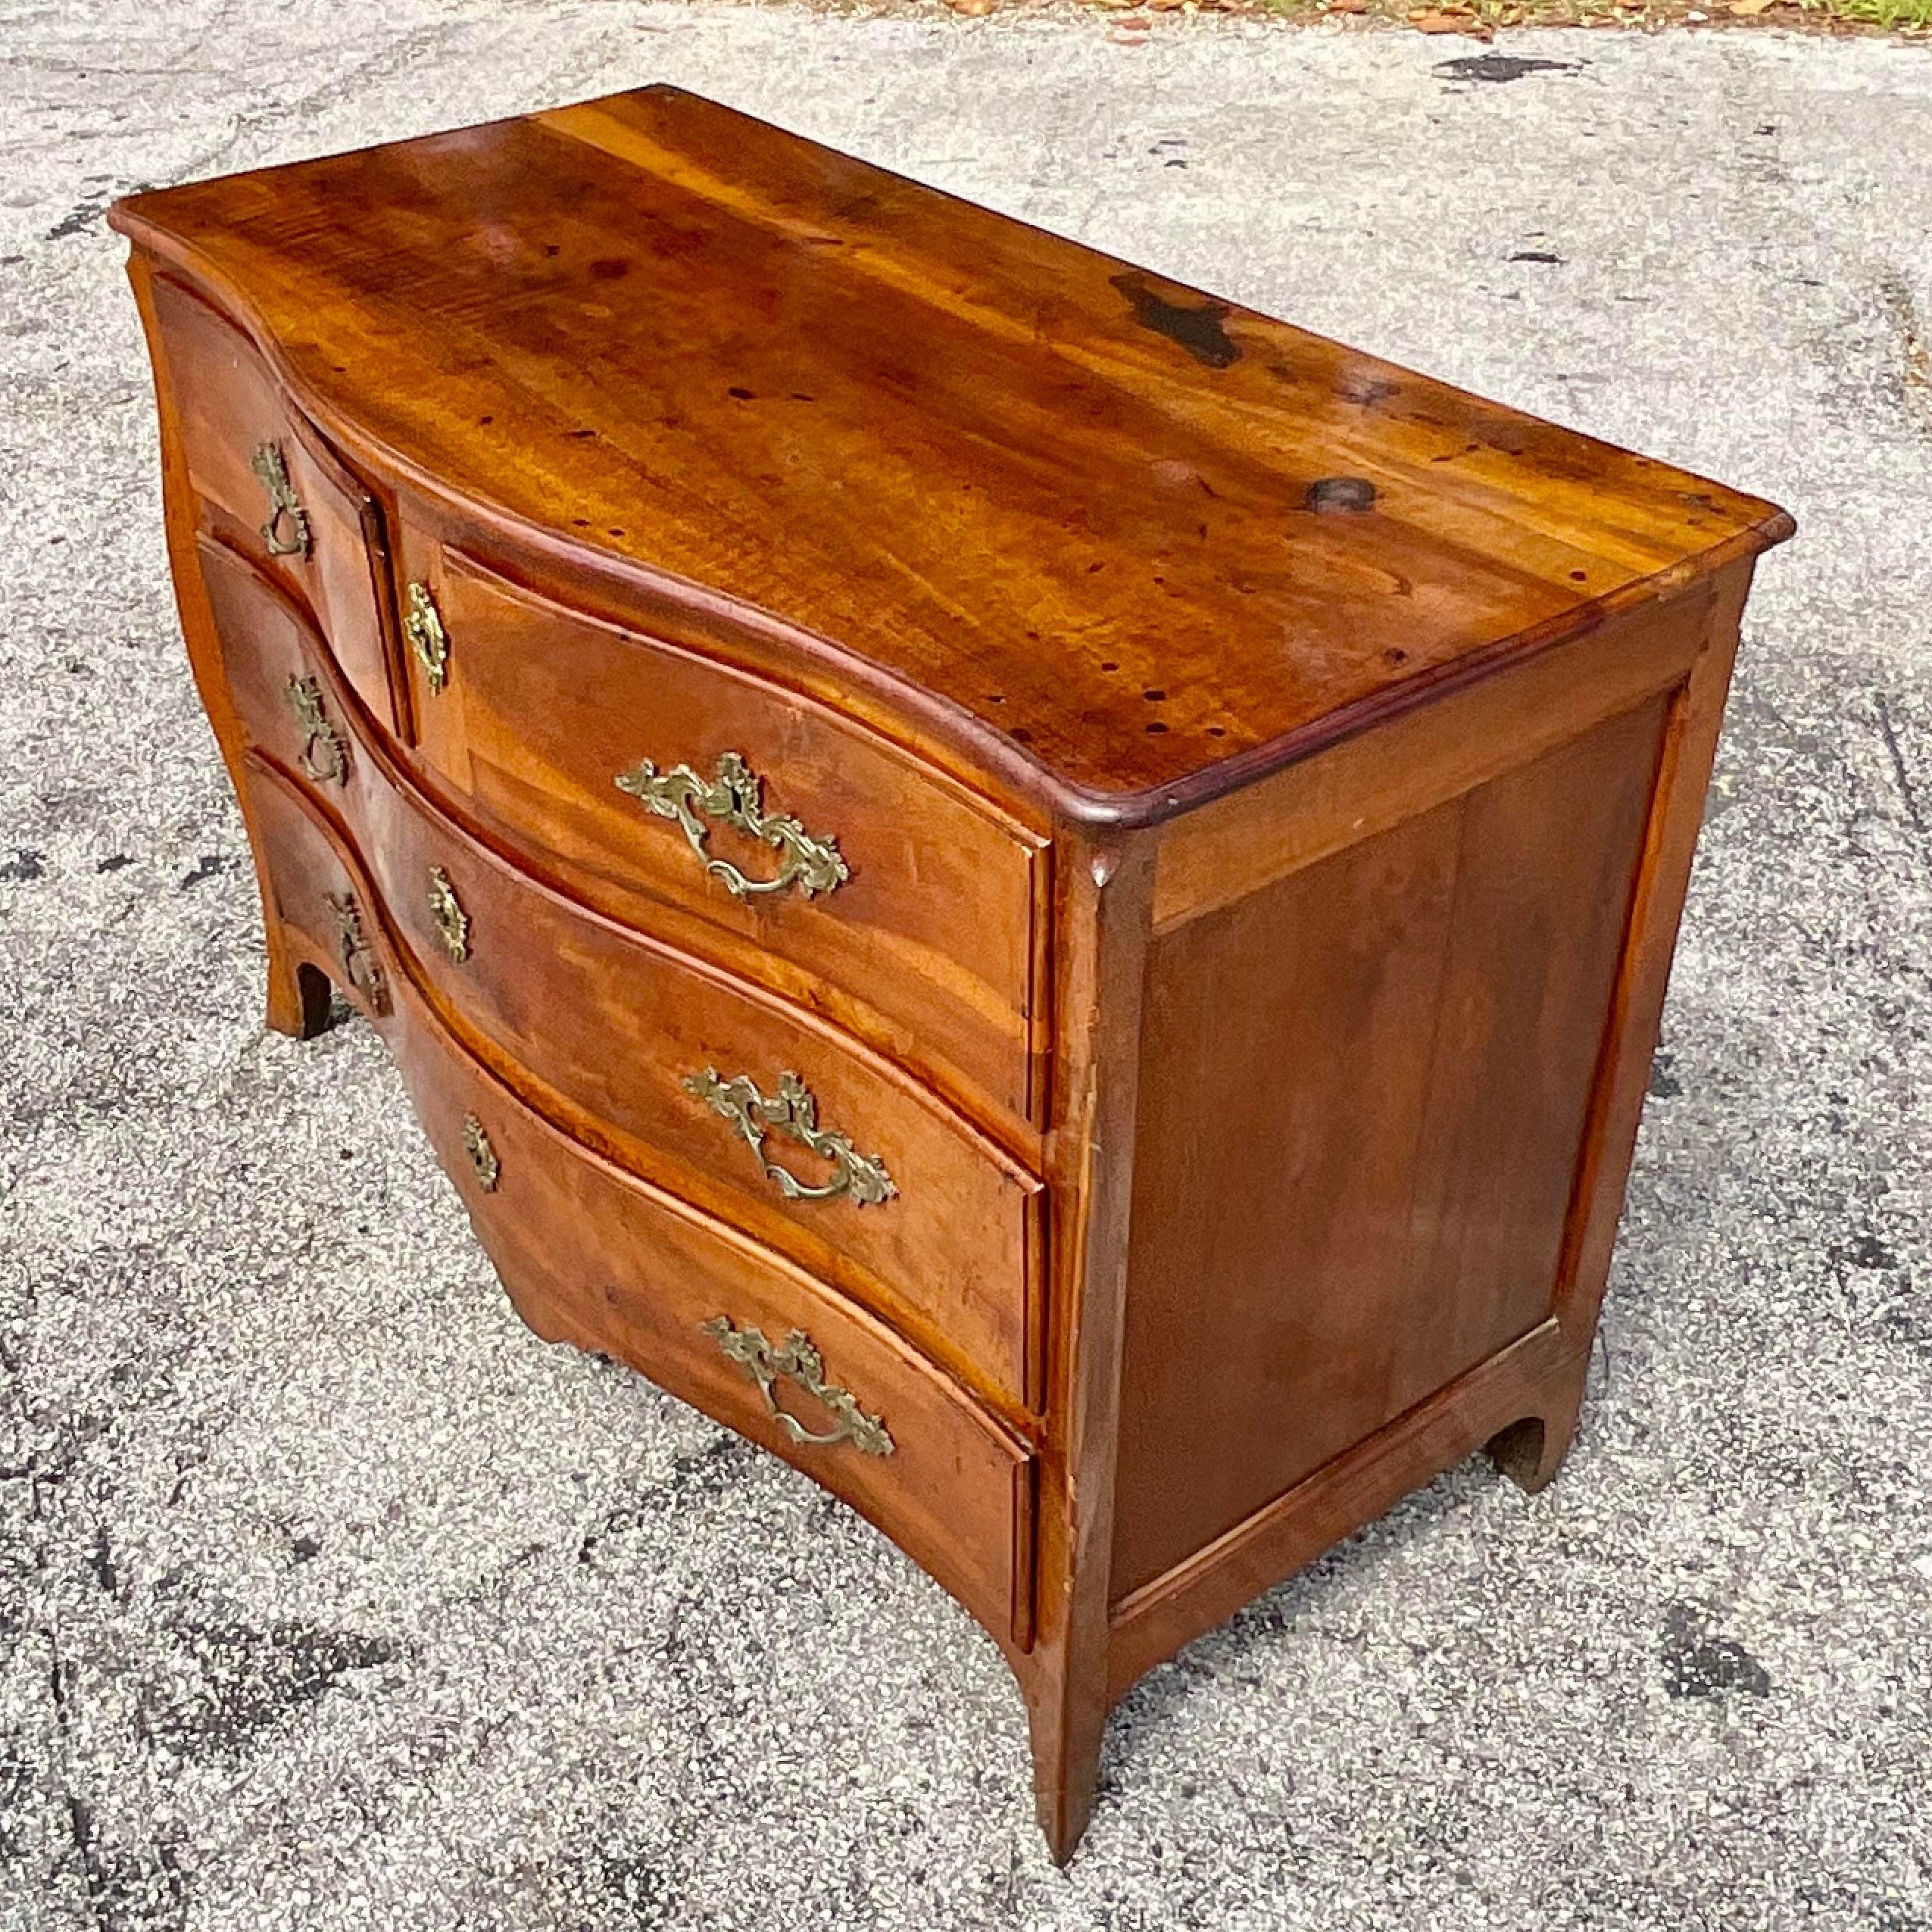 A fabulous vintage Italian chest of drawers. Incredible wood grain detail with a lovely roll front design. Heavy brass hardware. Acquired from a Palm Beach estate